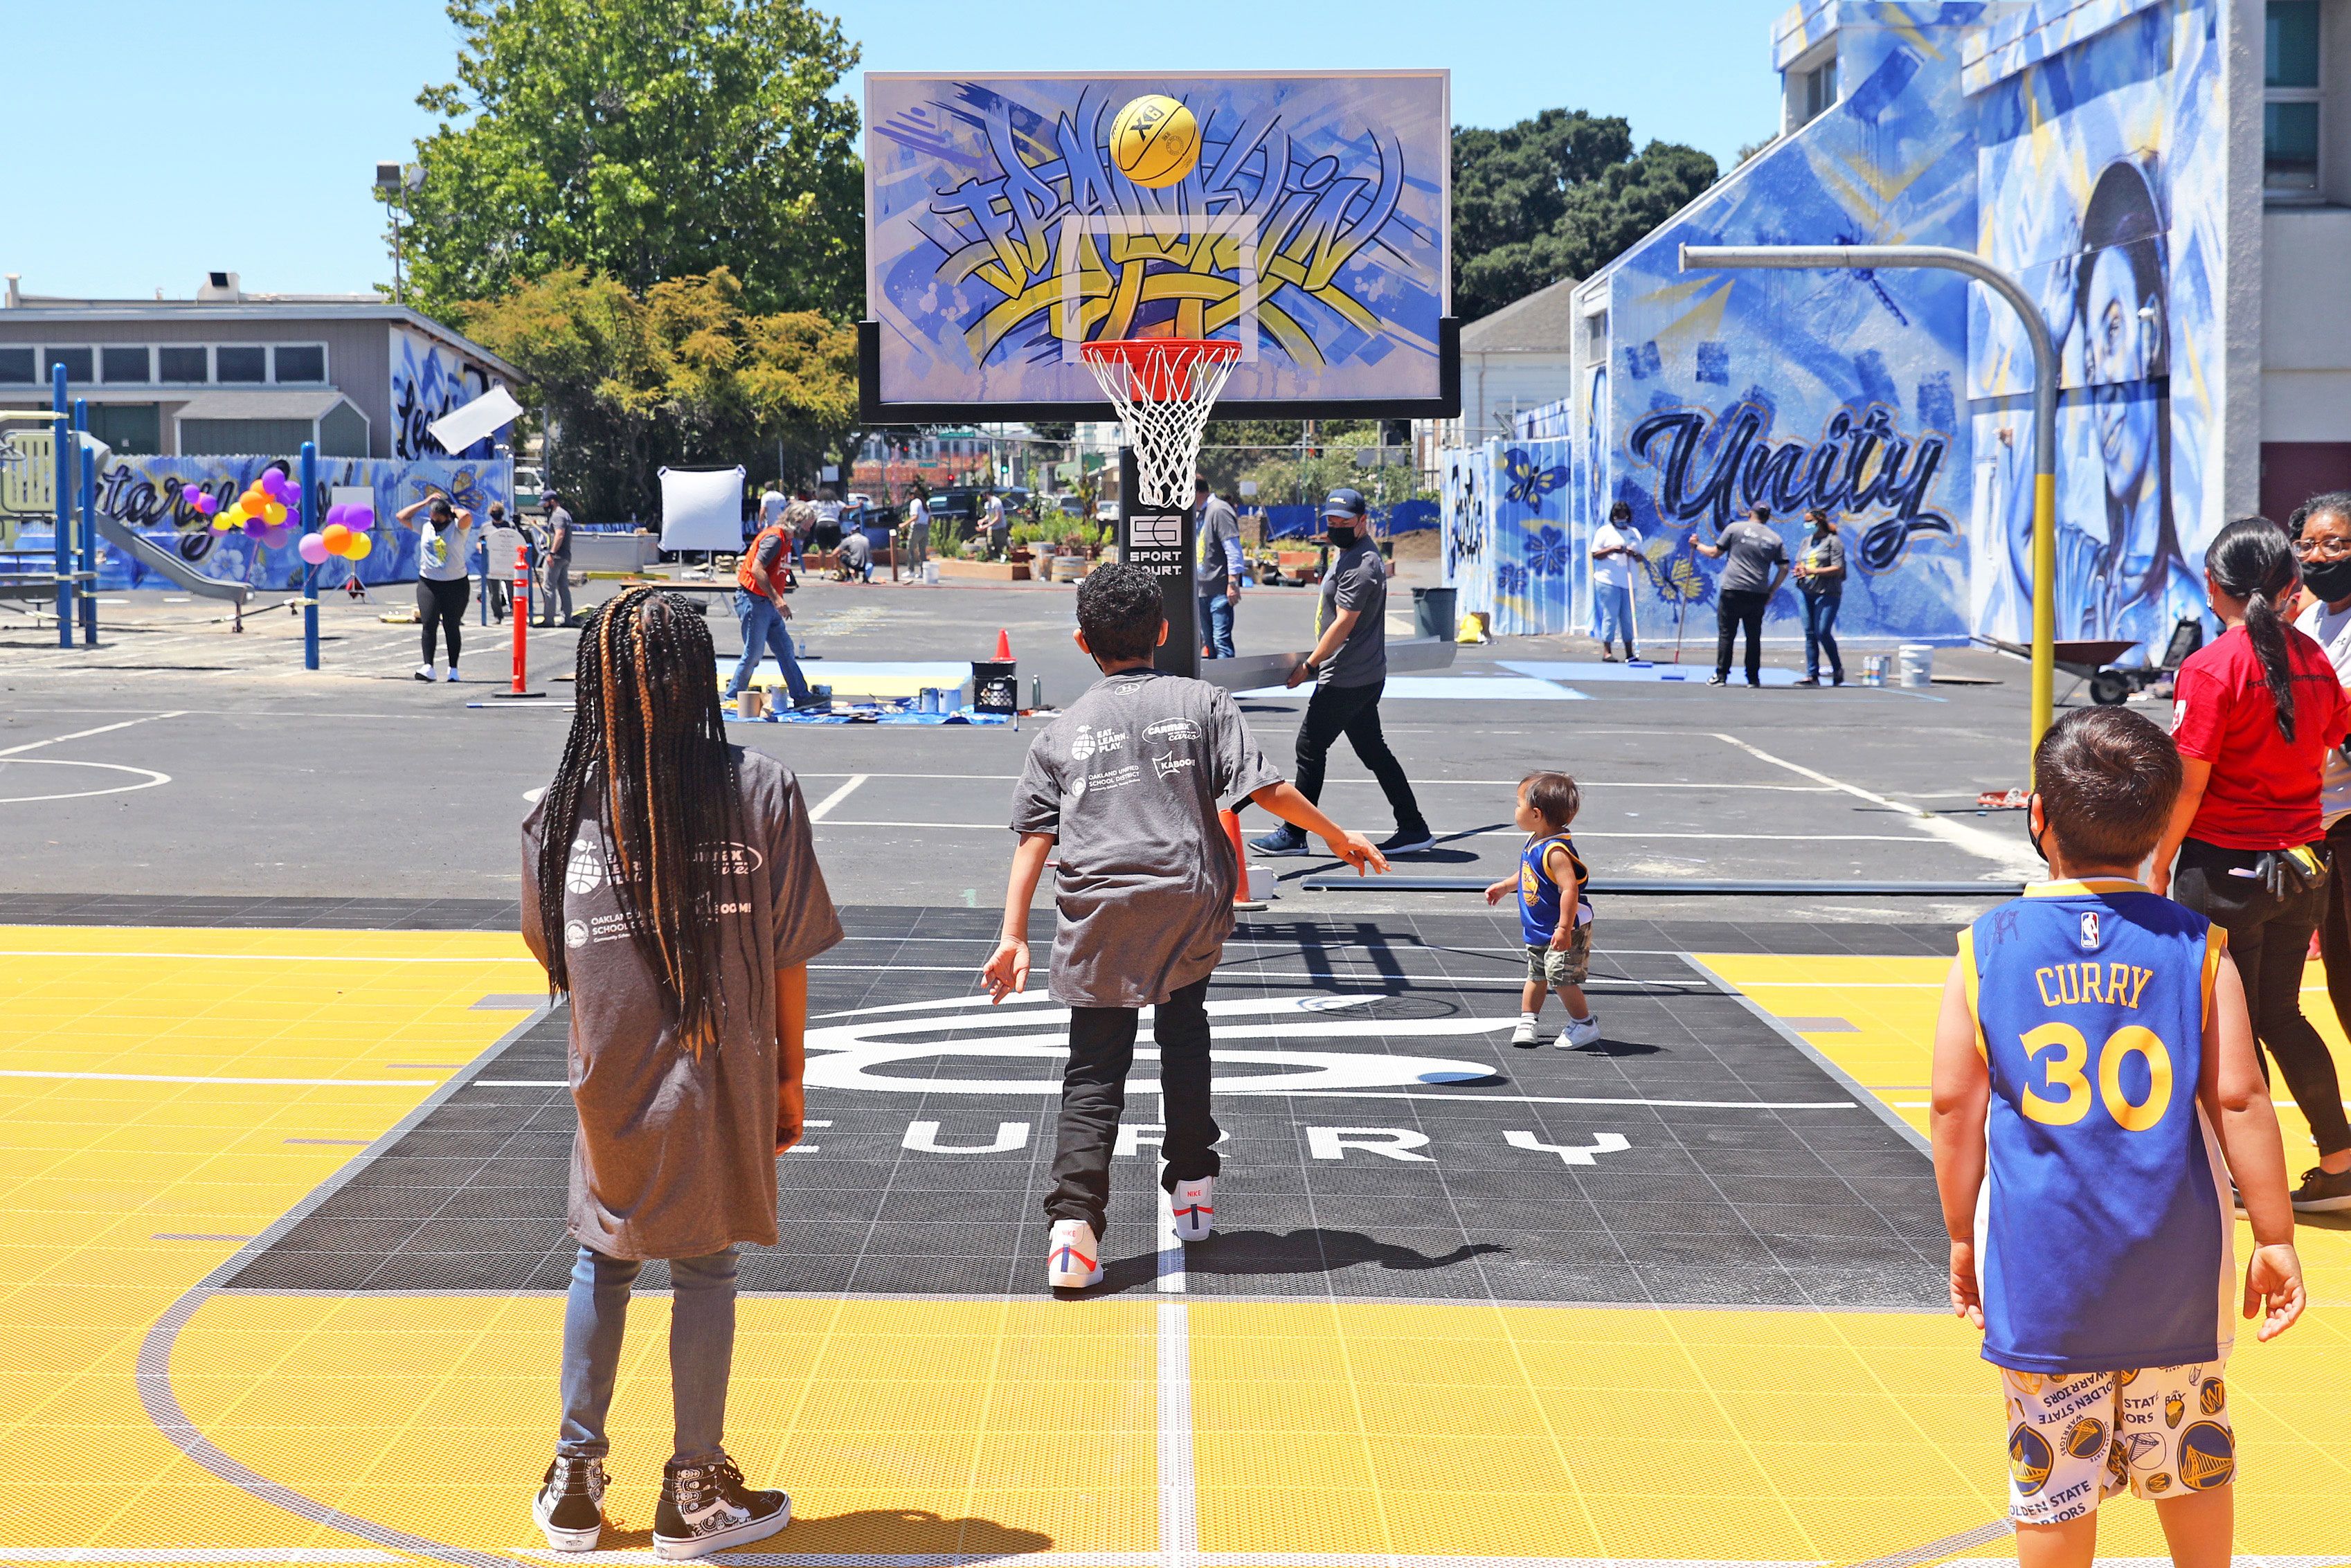 Steph and Ayesha Curry help remodel an Oakland elementary school playground | CNN